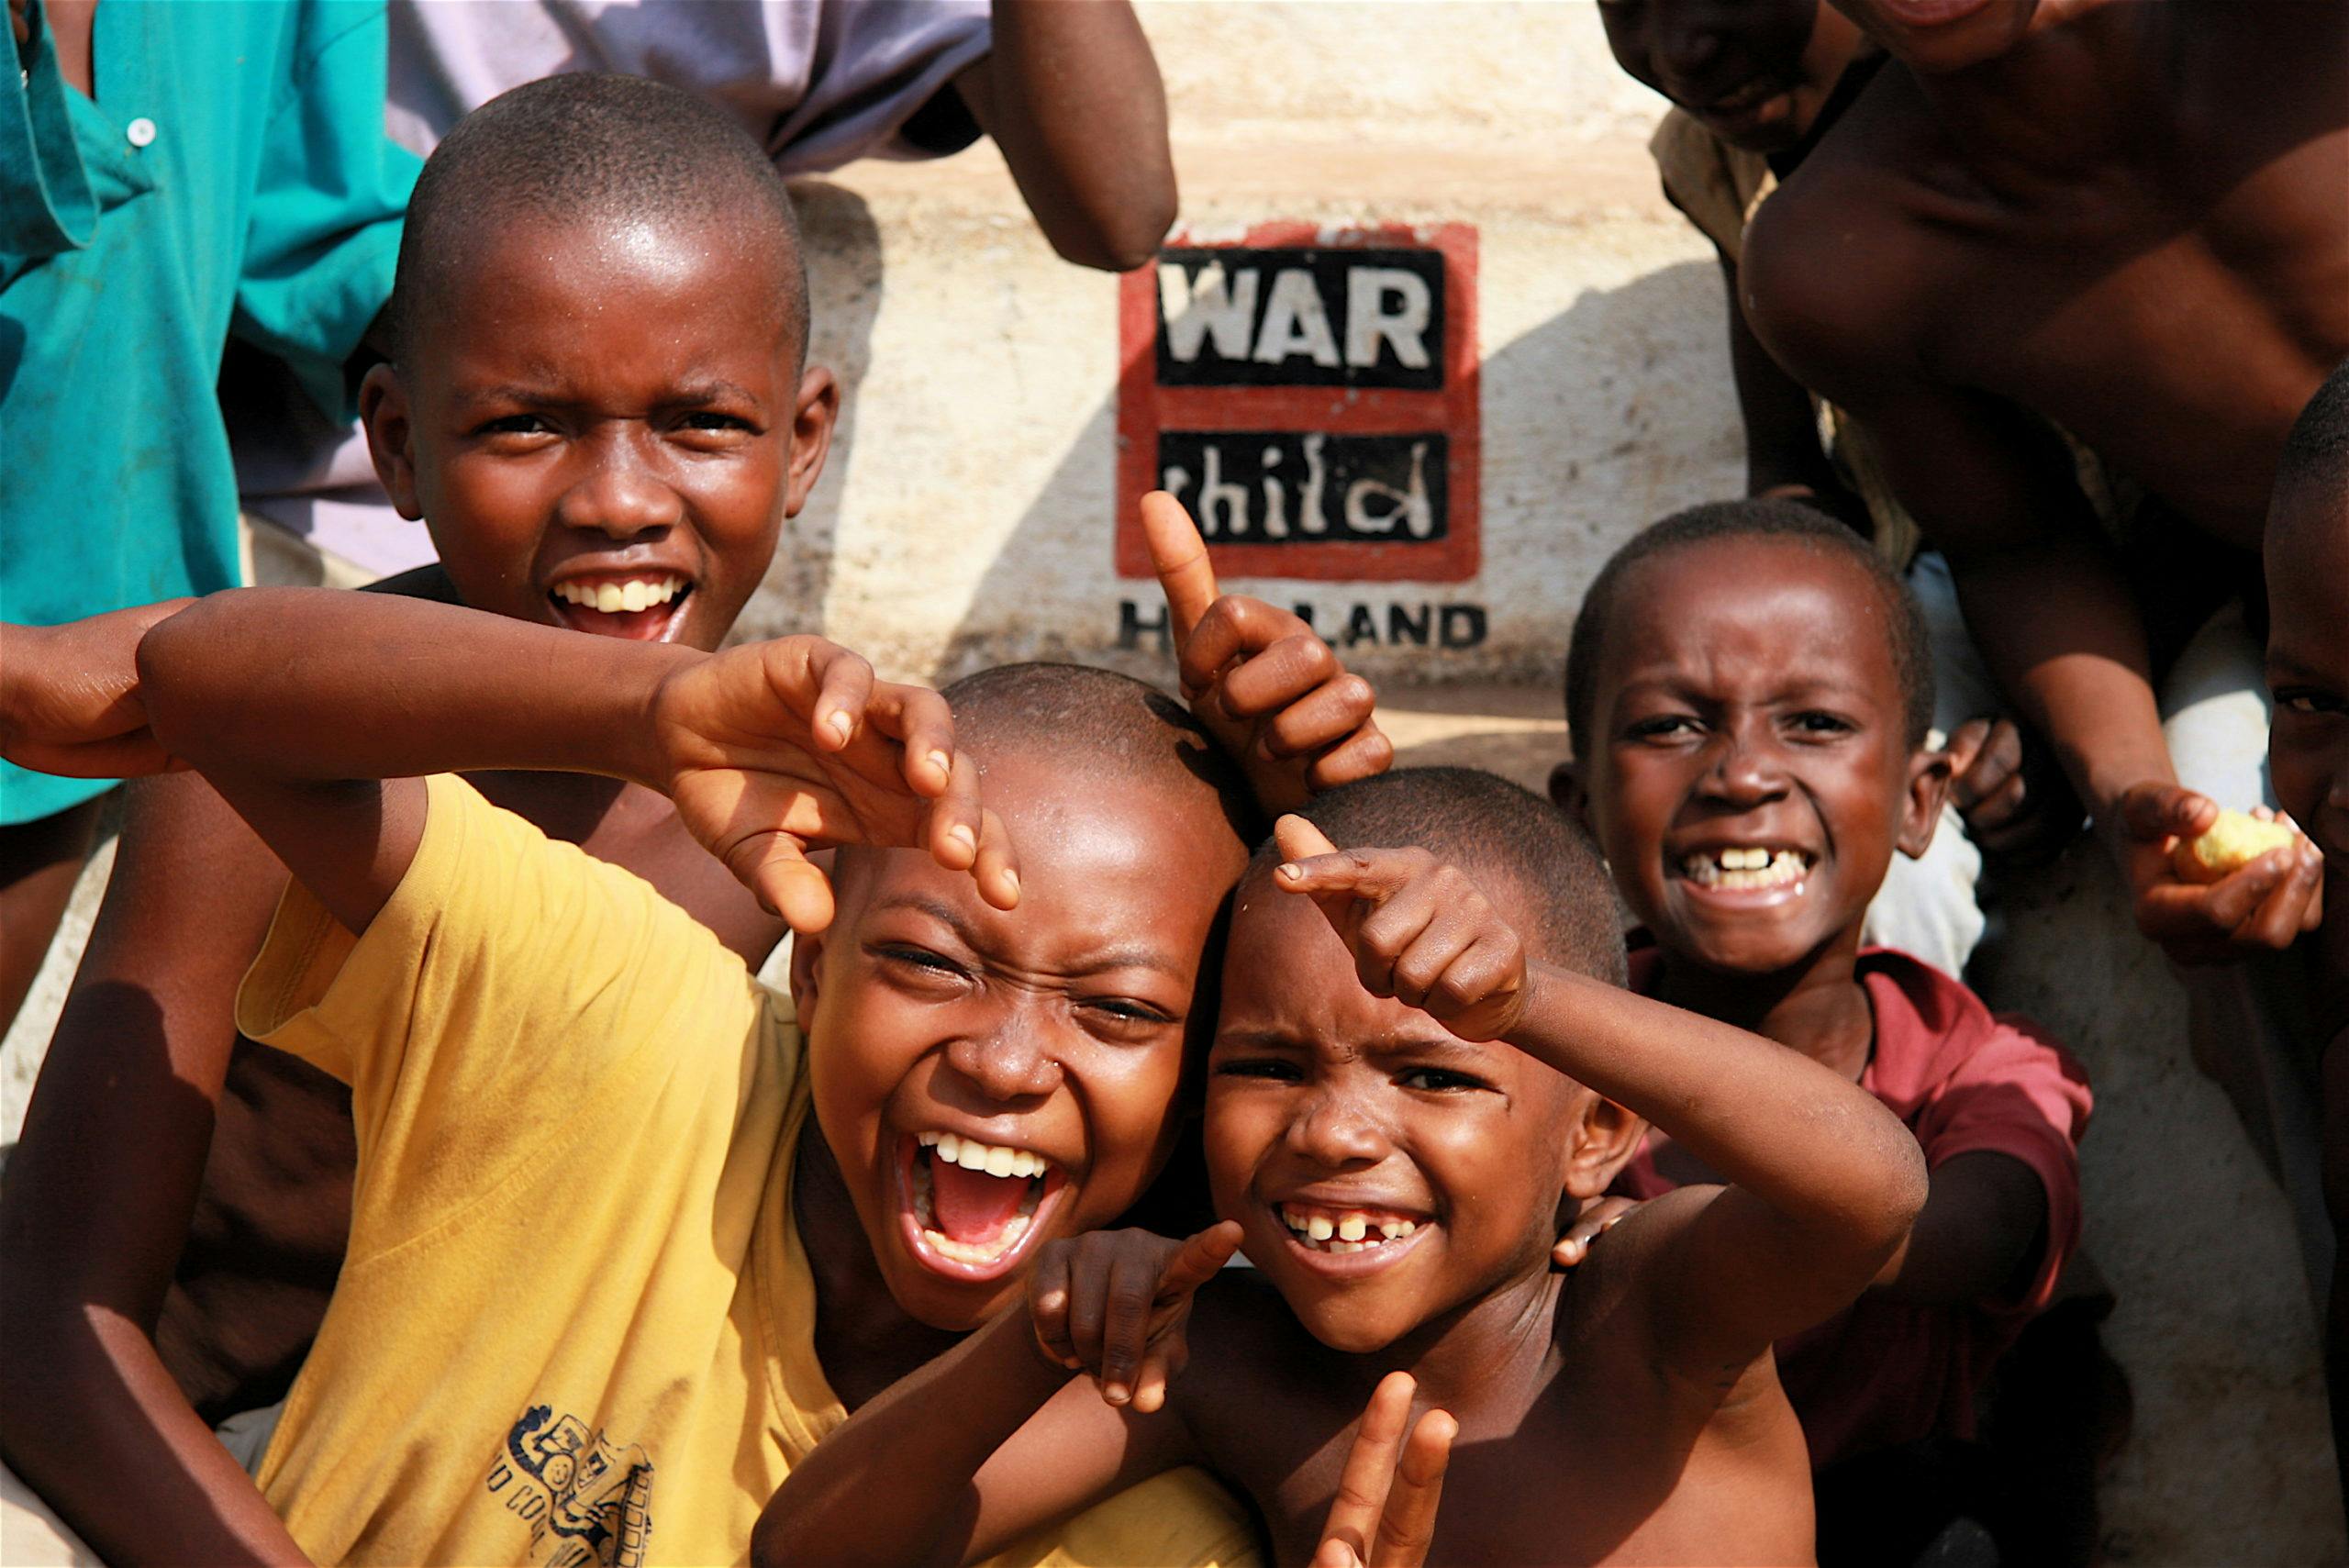 Children laughing in front of text war child.